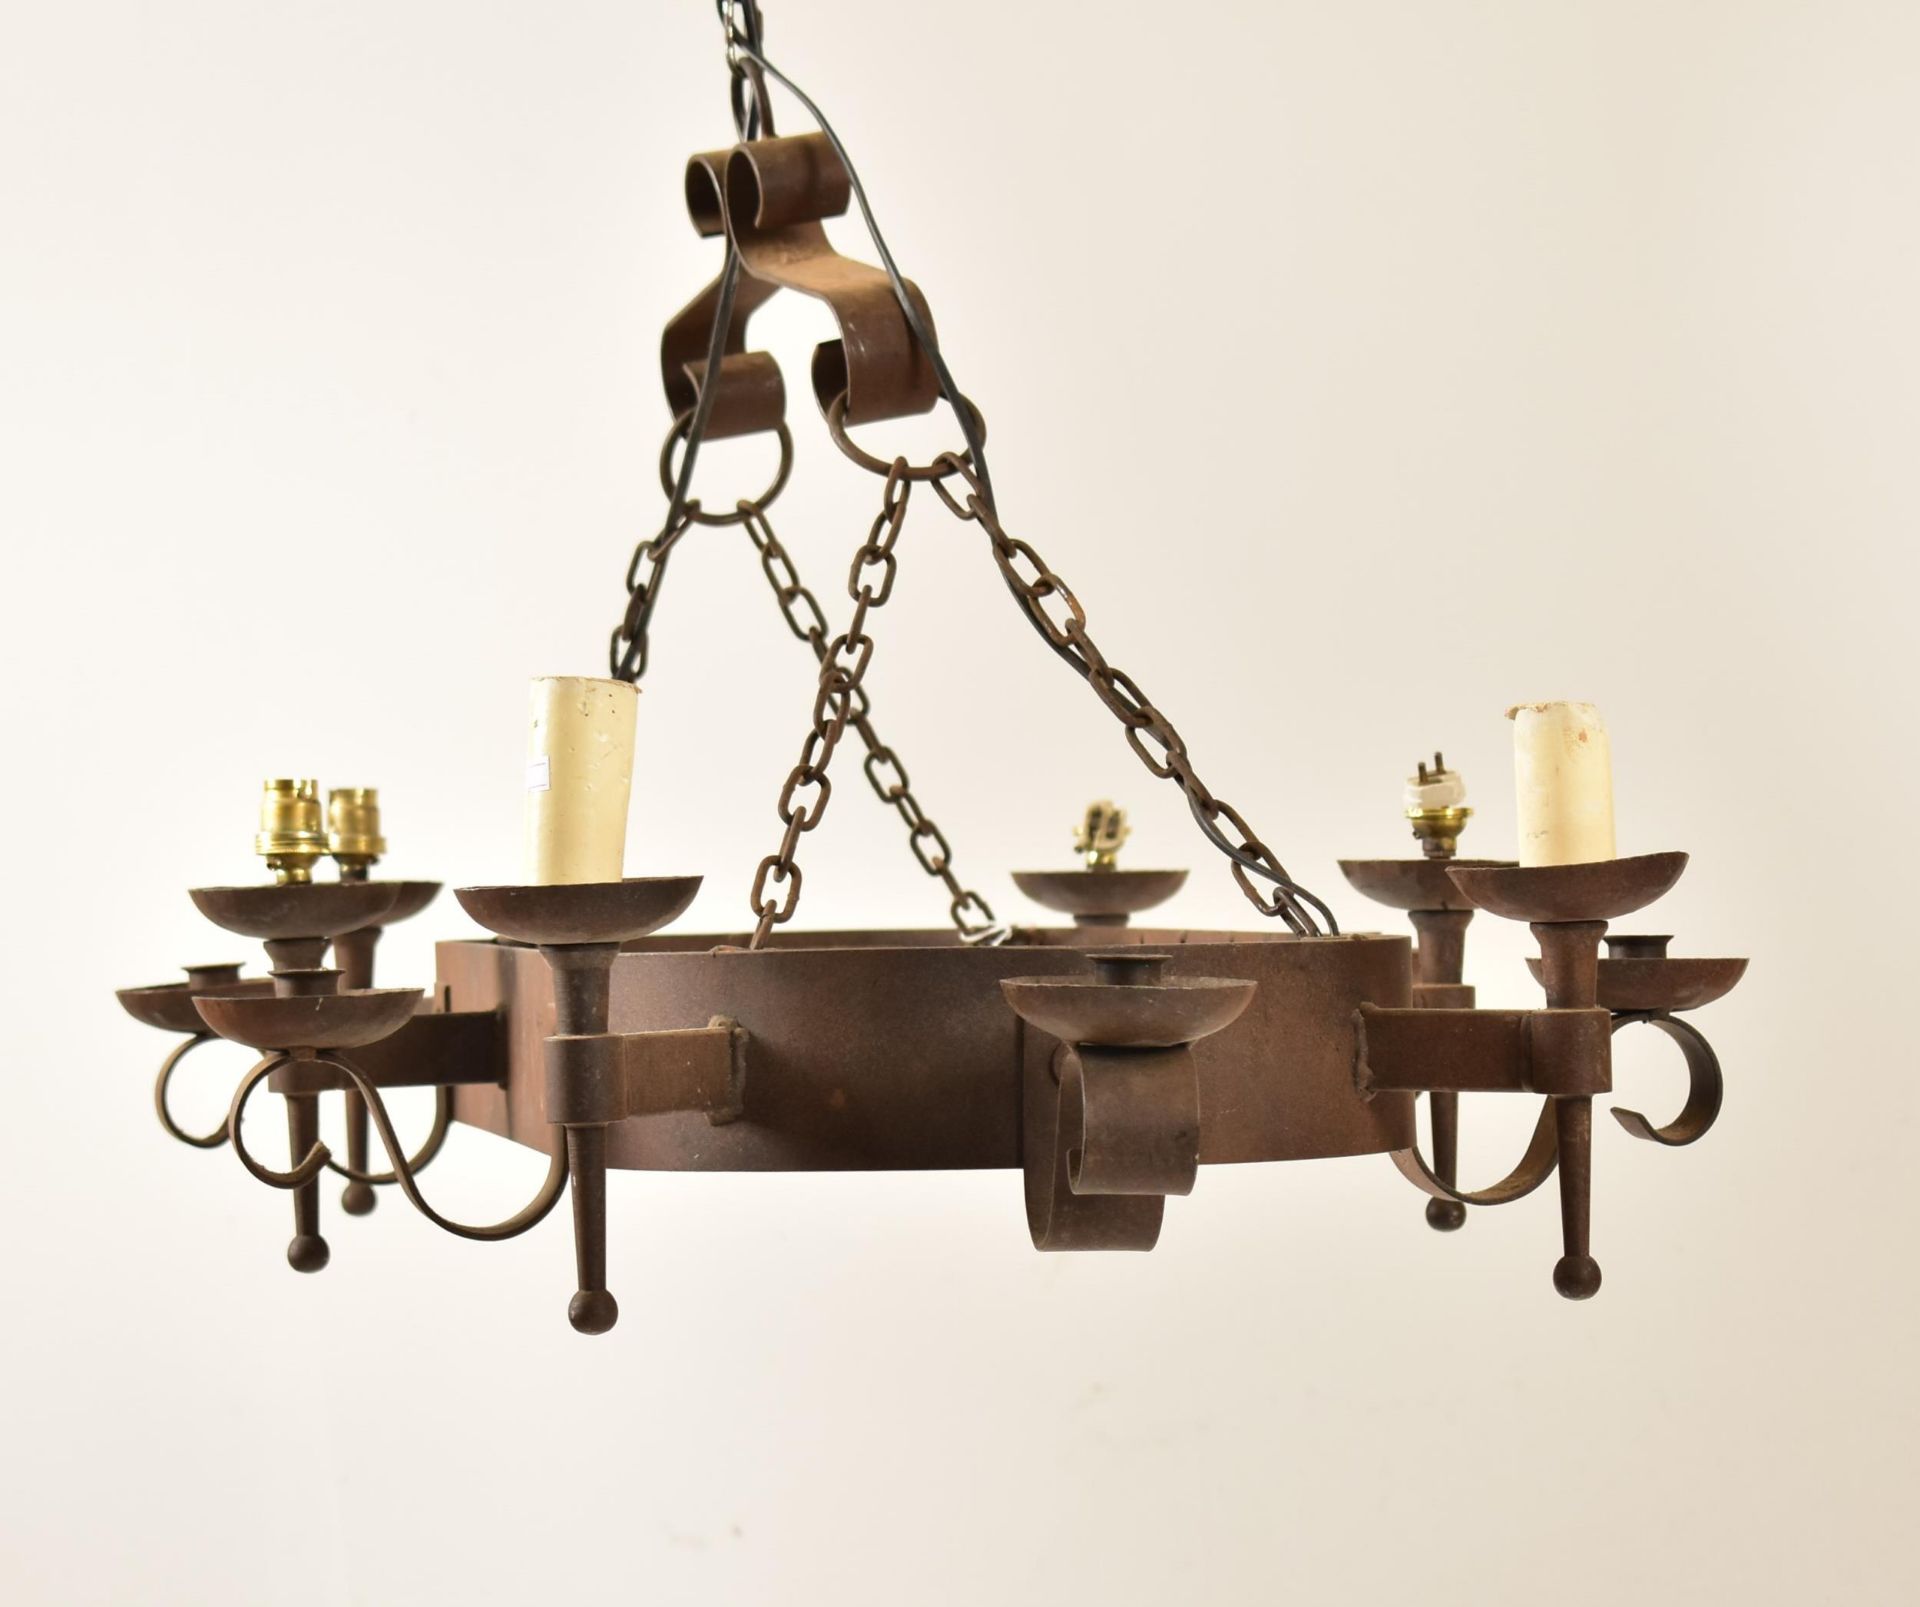 20TH CENTURY MEDIEVAL REVIVAL CAST IRON CHANDELIER - Image 4 of 9